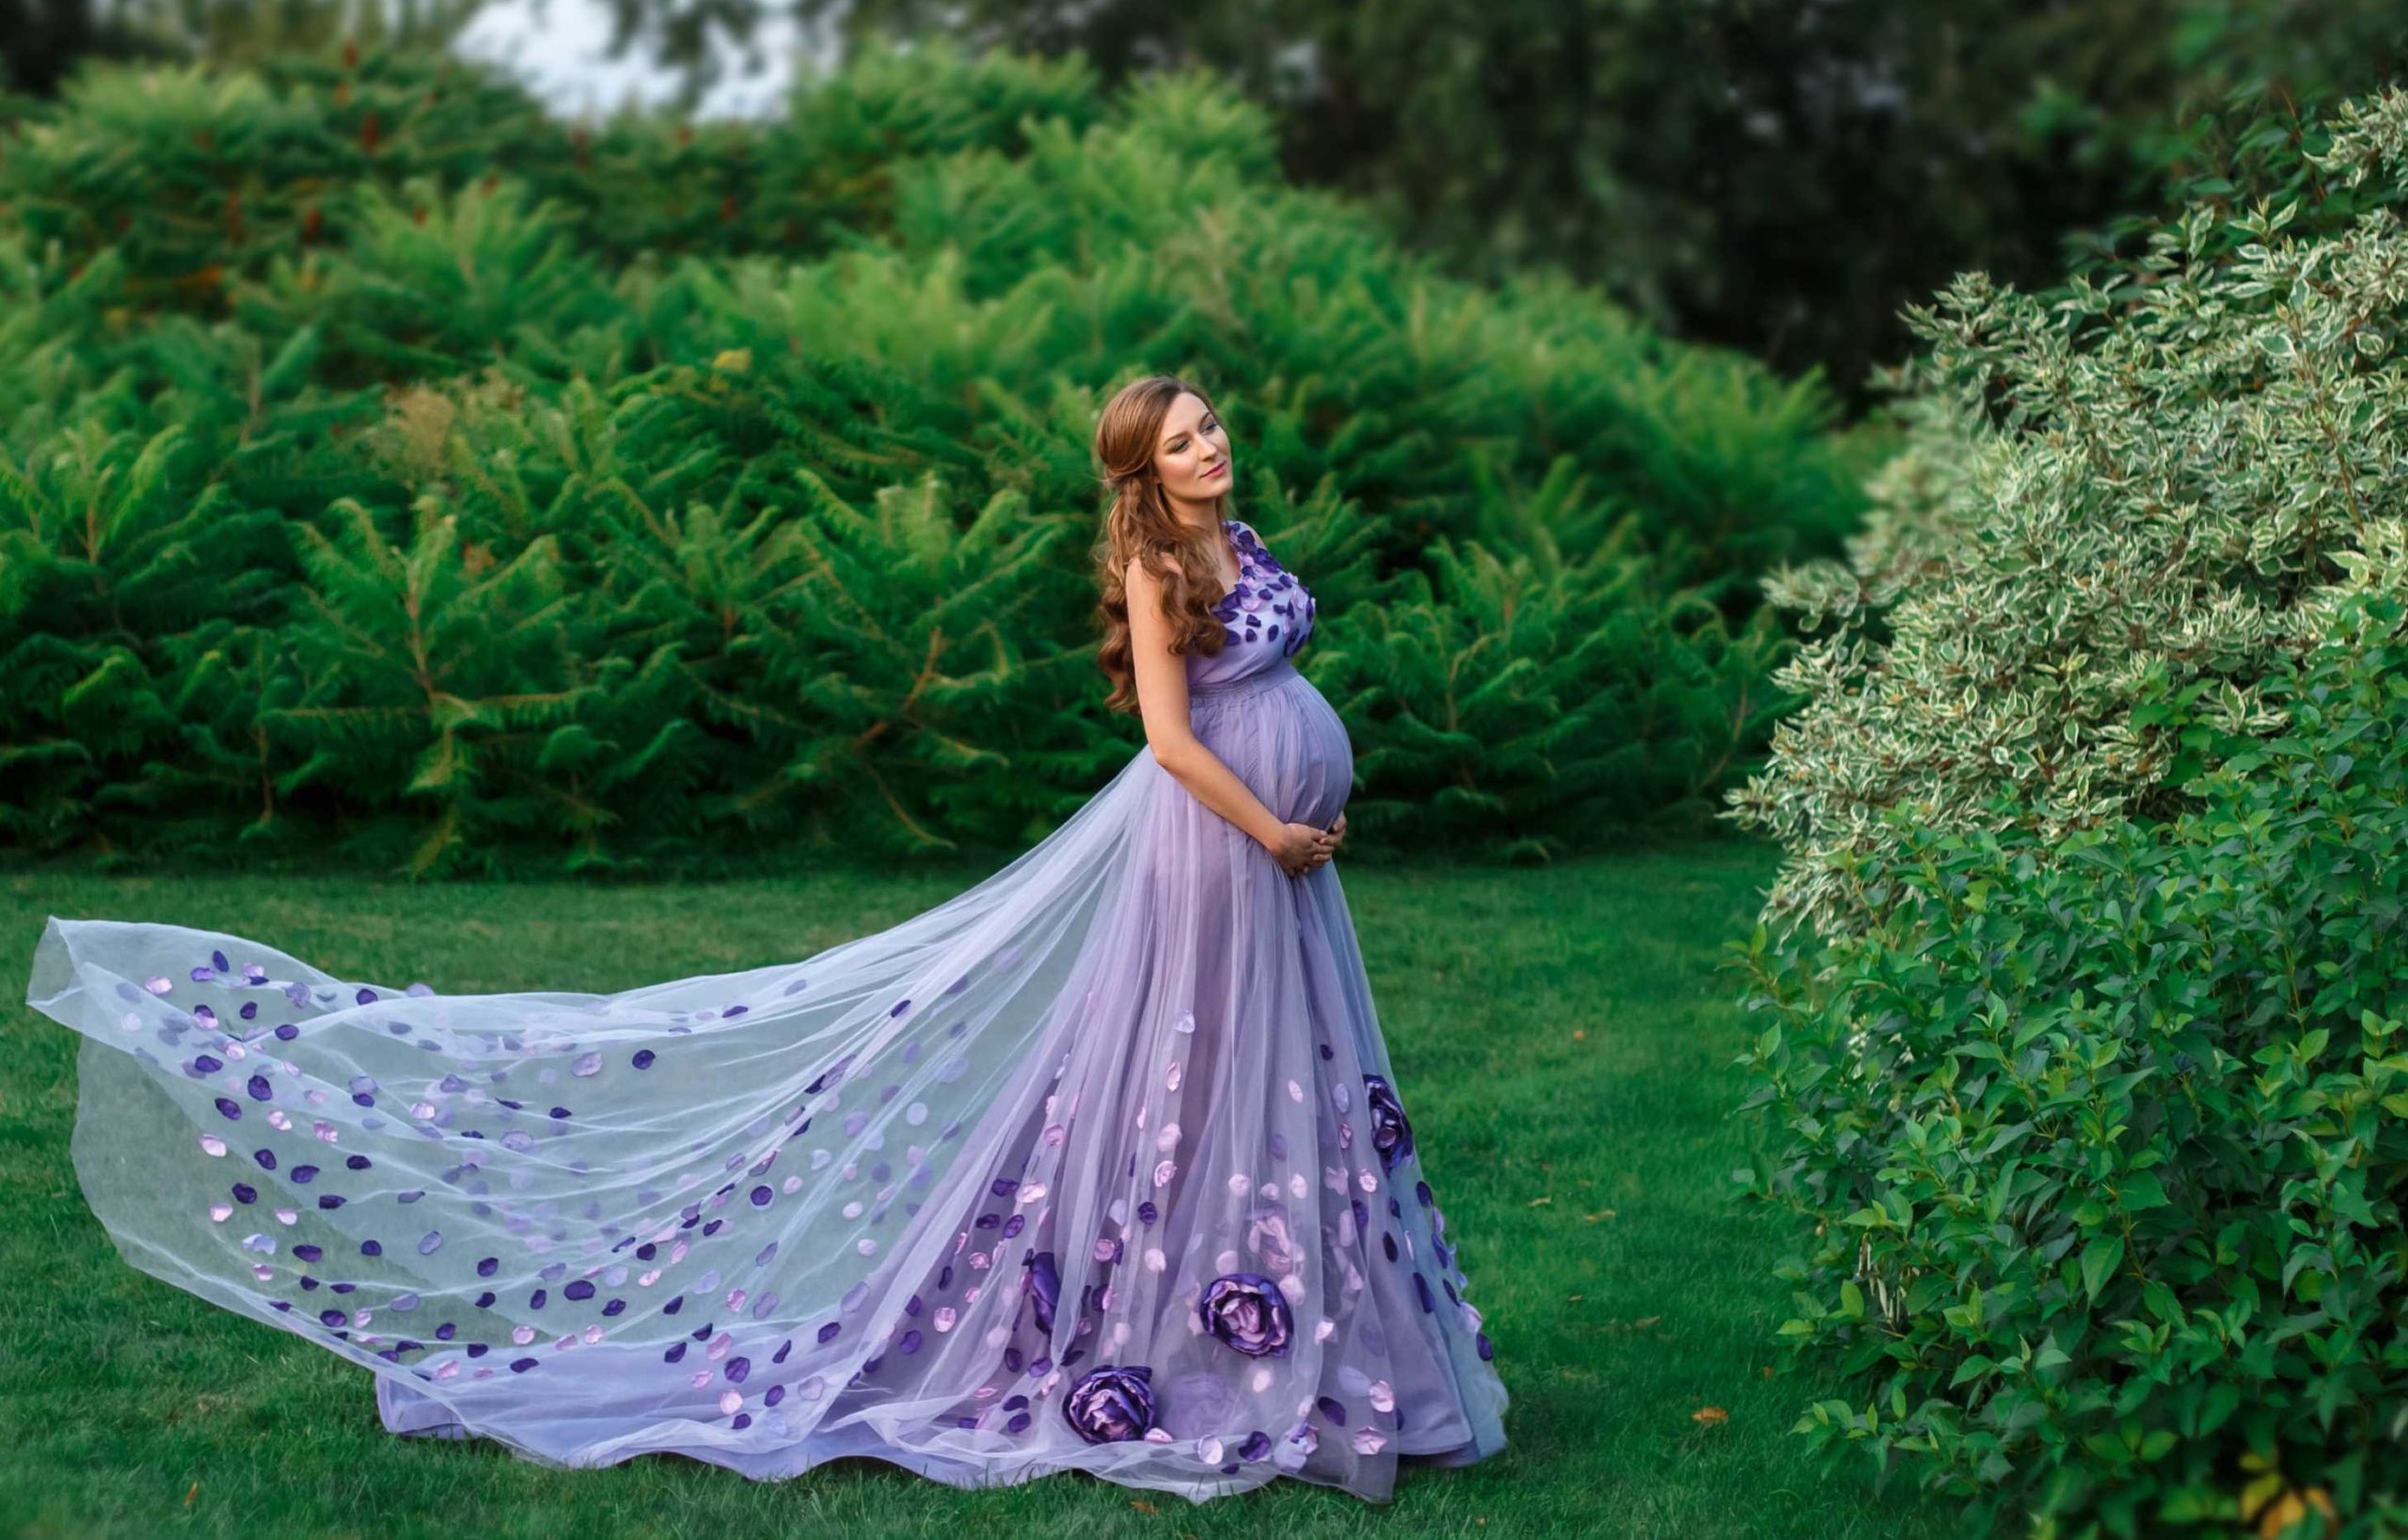 Fairy-long-dress-scaled Hottest 25 Maternity Photoshoot Outfit Ideas